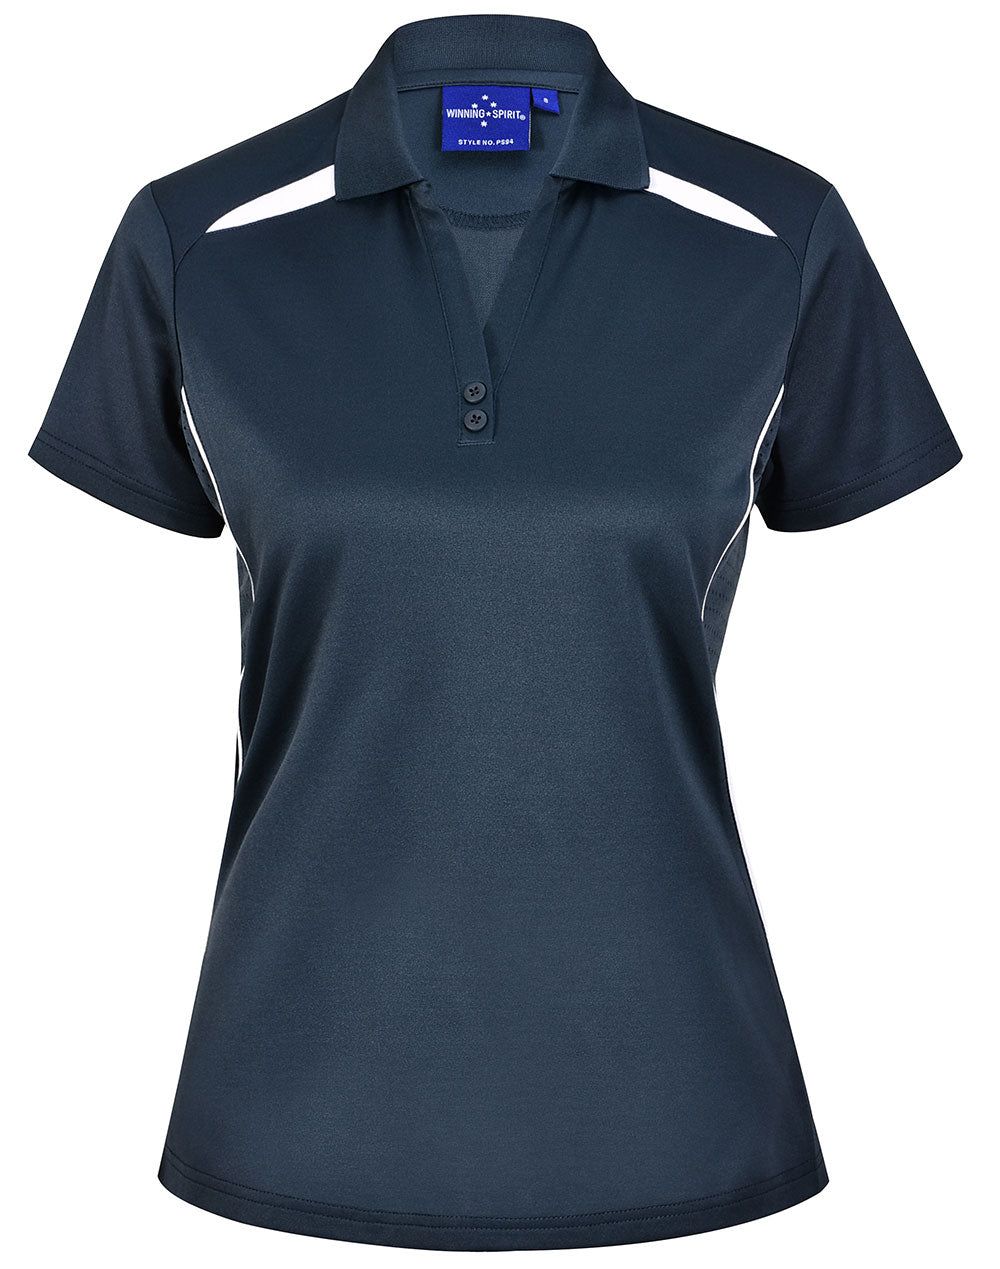 Winning Spirit Women's Sustainable Poly-Cotton Contrast Polo PS94 Casual Wear Winning Spirit Heavy Cloud/White 6 